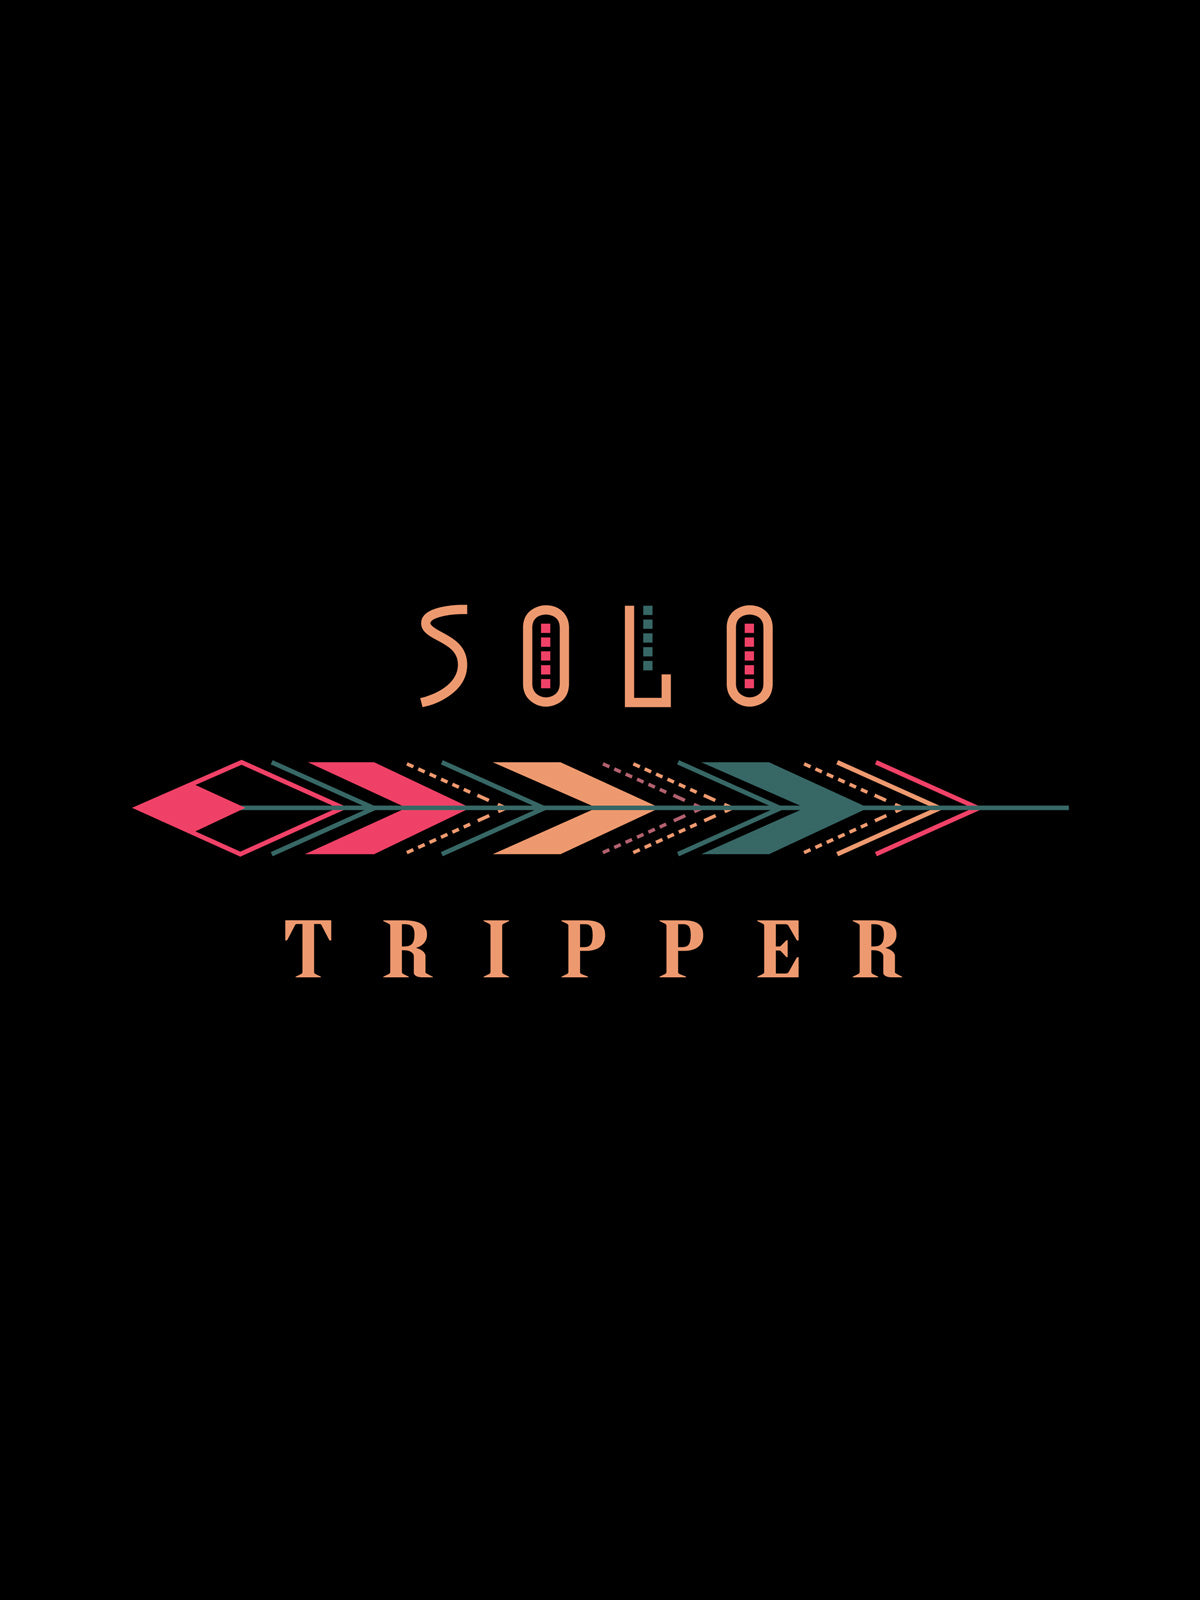 Solo-tripper-printed-t-shirt-for-men by Ghumakkad